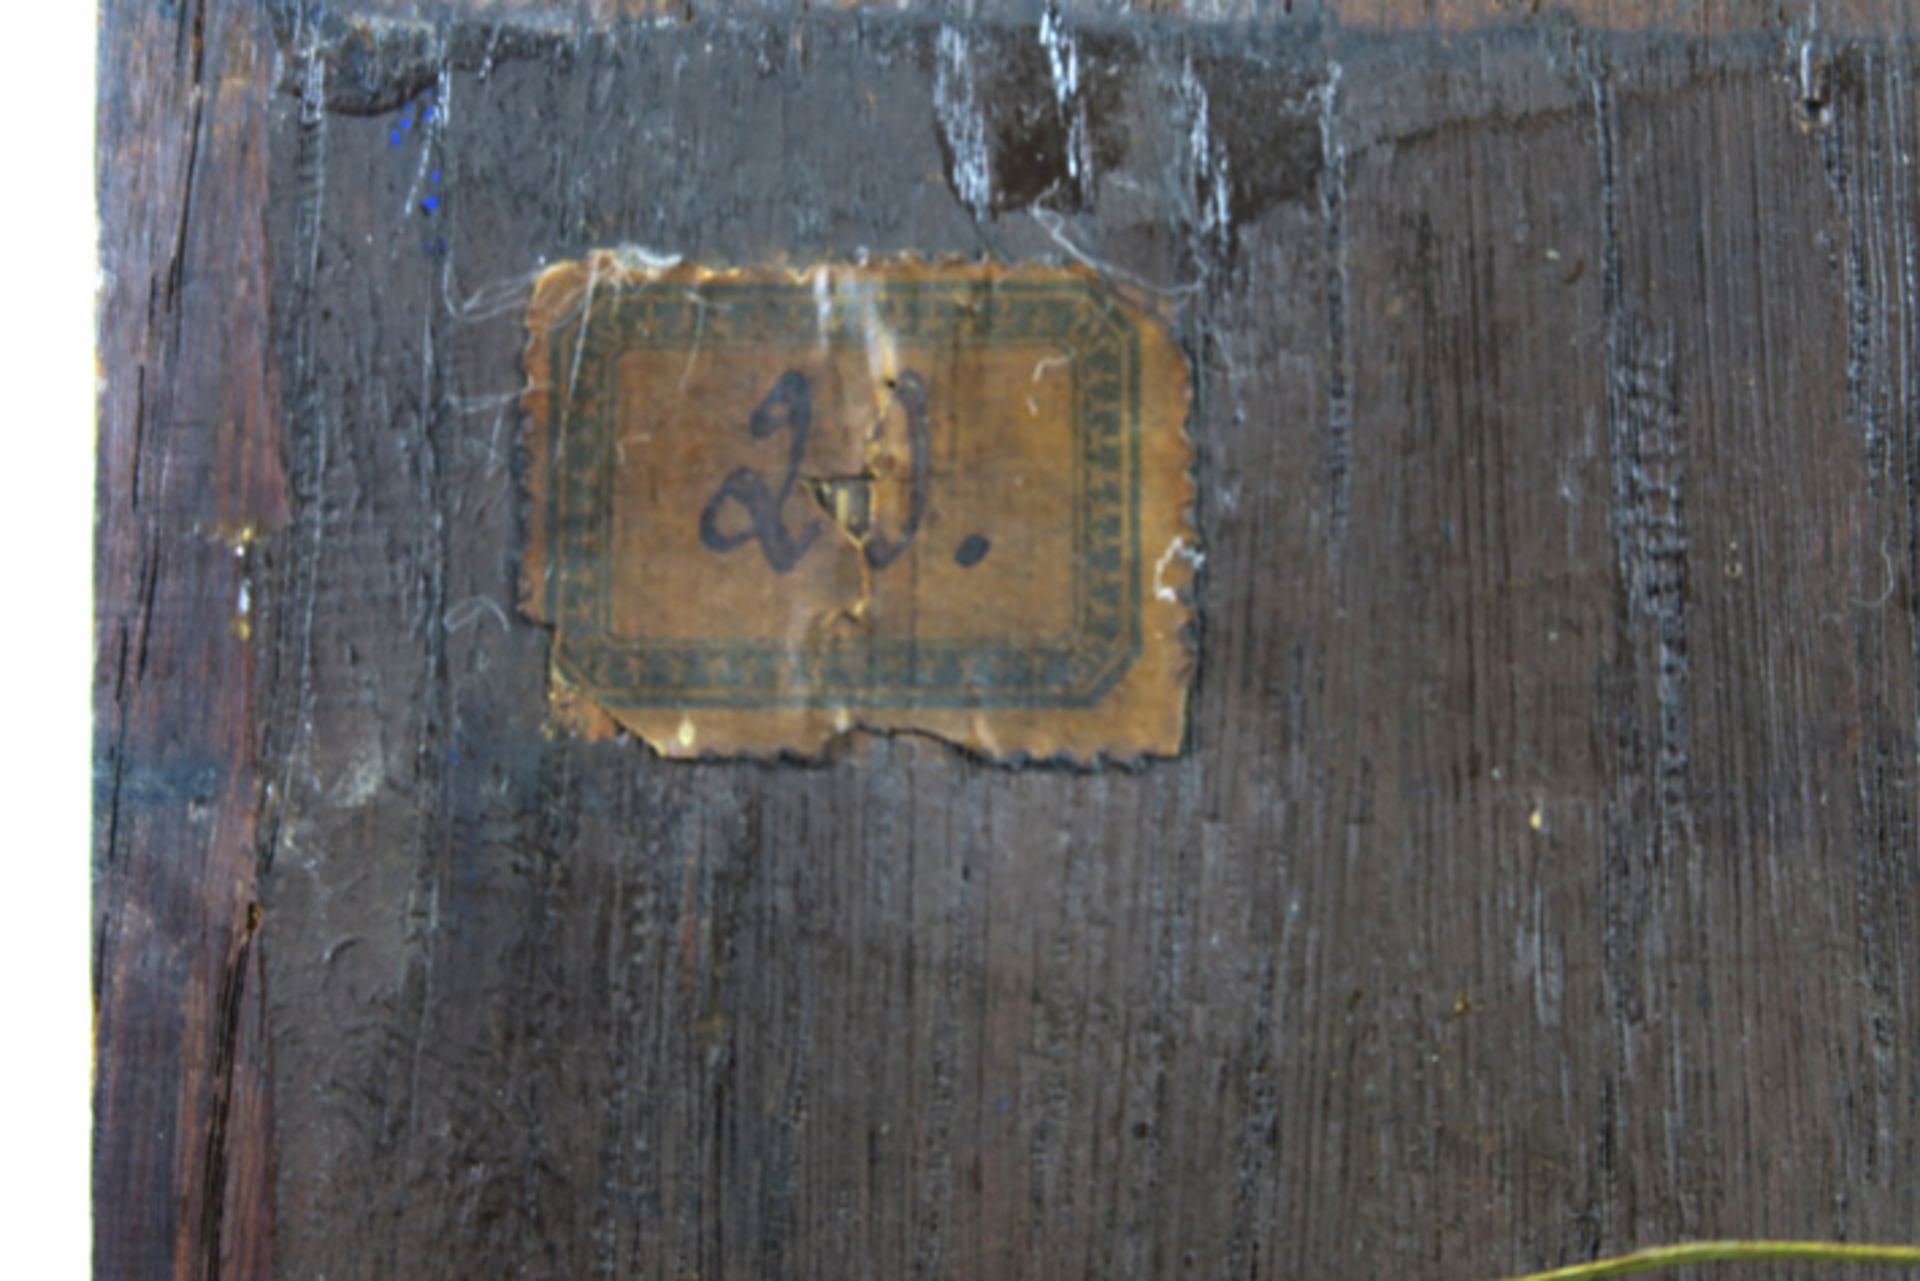 early 19th Cent. oil on panel with a unclear monogram "B" attributed to Richard Parkes Bonnington - Image 5 of 5